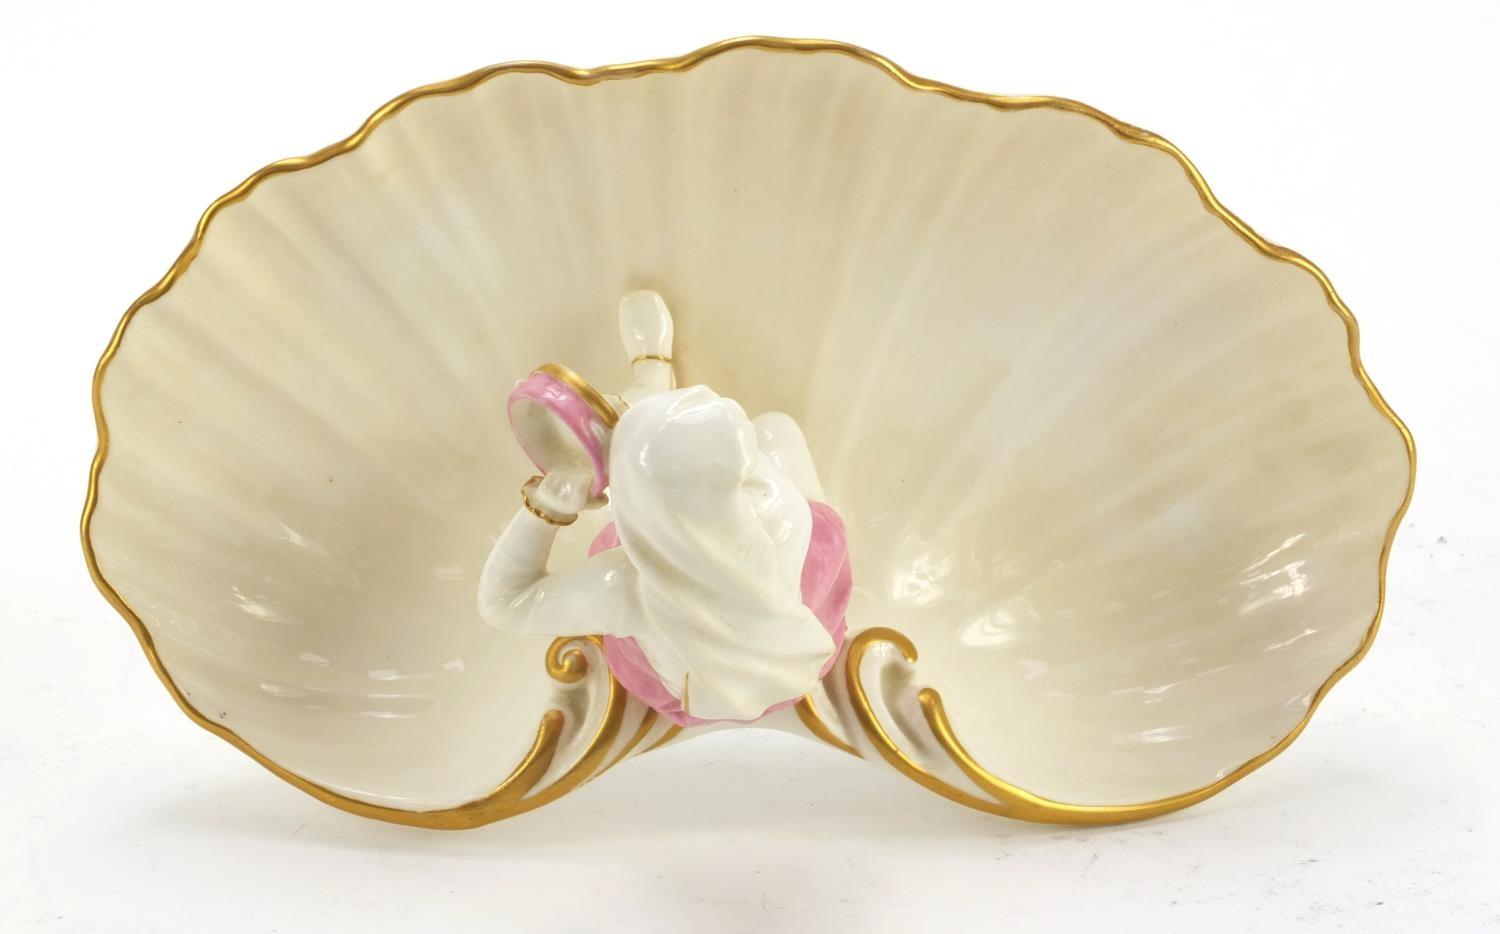 Victorian Worcester figural shell sweetmeat dish mounted with a girl holding a tambourine, 21.5 wide - Image 8 of 8